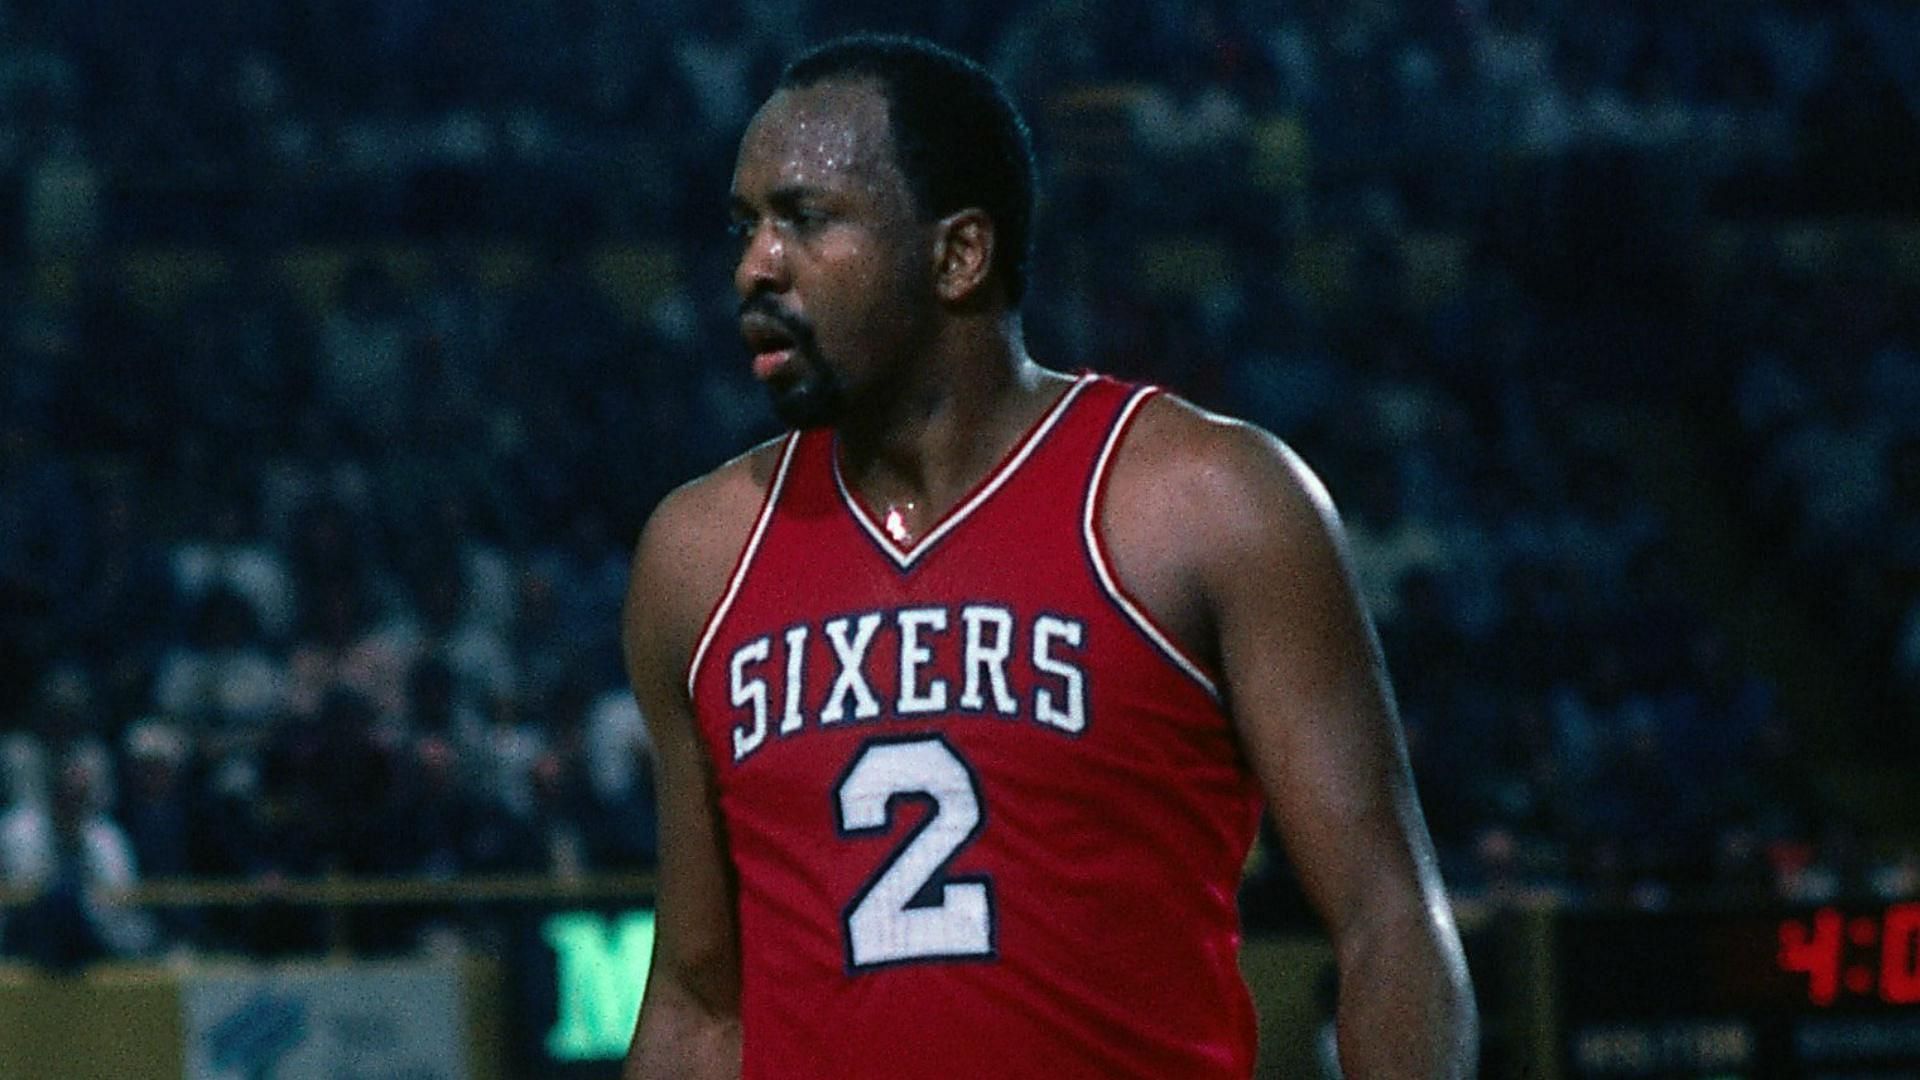 The Philadelphia 76ers traded Moses Malone for Jeff Ruland, Cliff Robinson and picks in 1986. [photo: Sporting News]